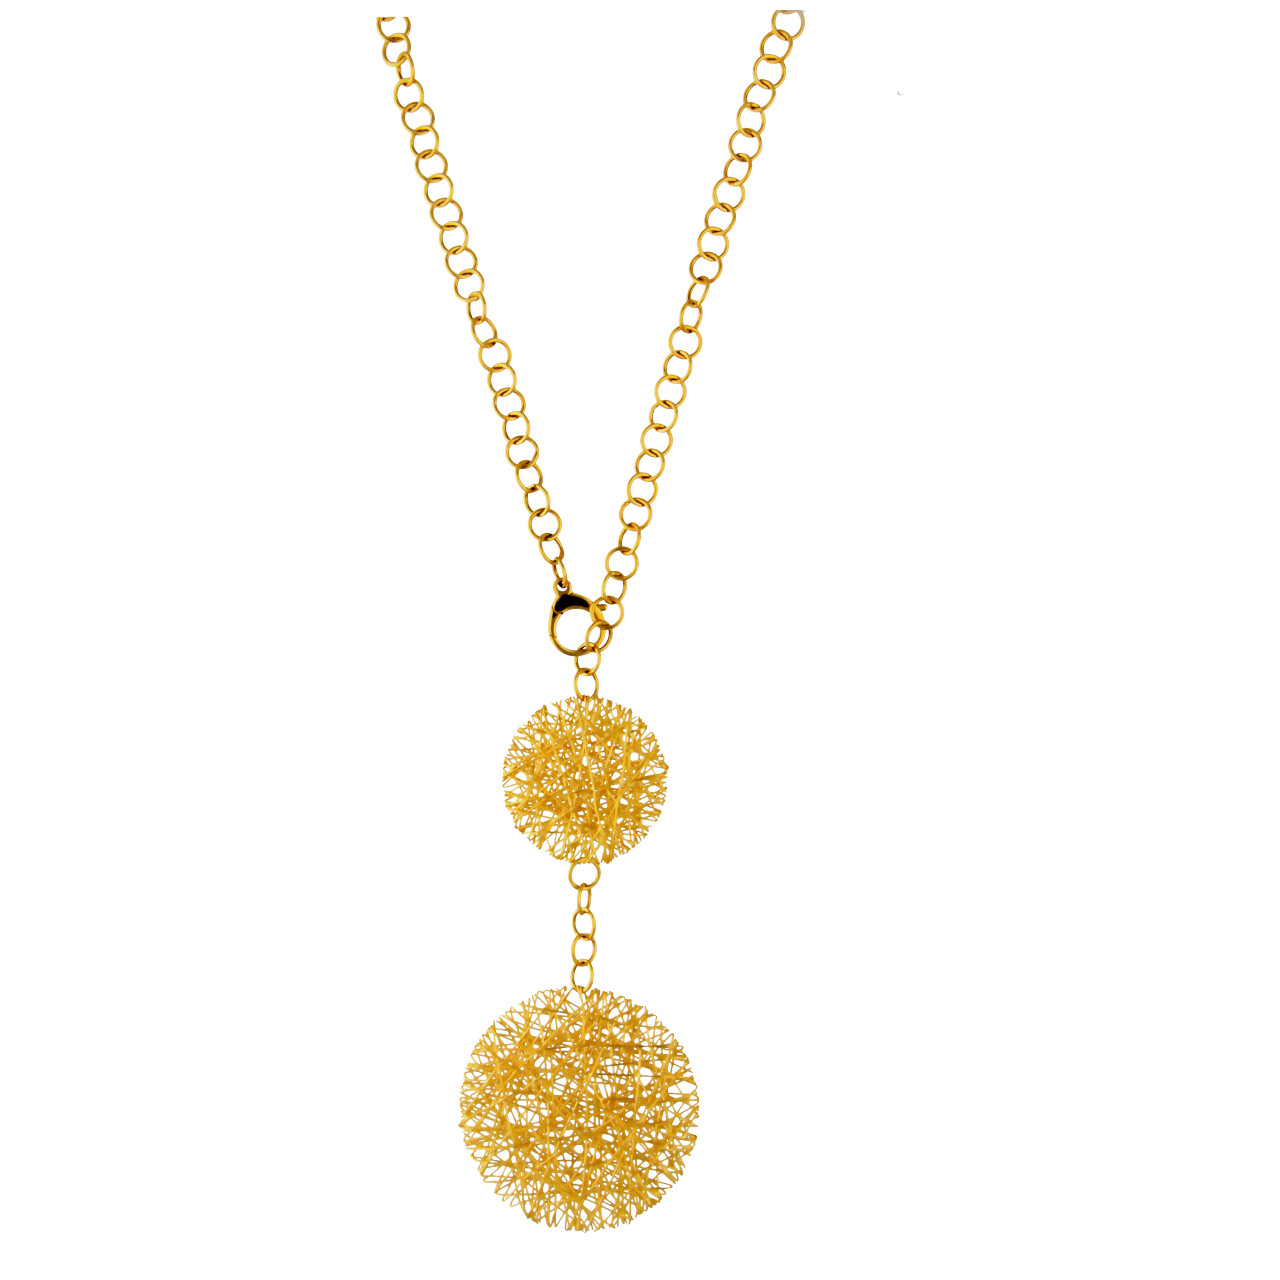 Yellow gold necklace with double circle